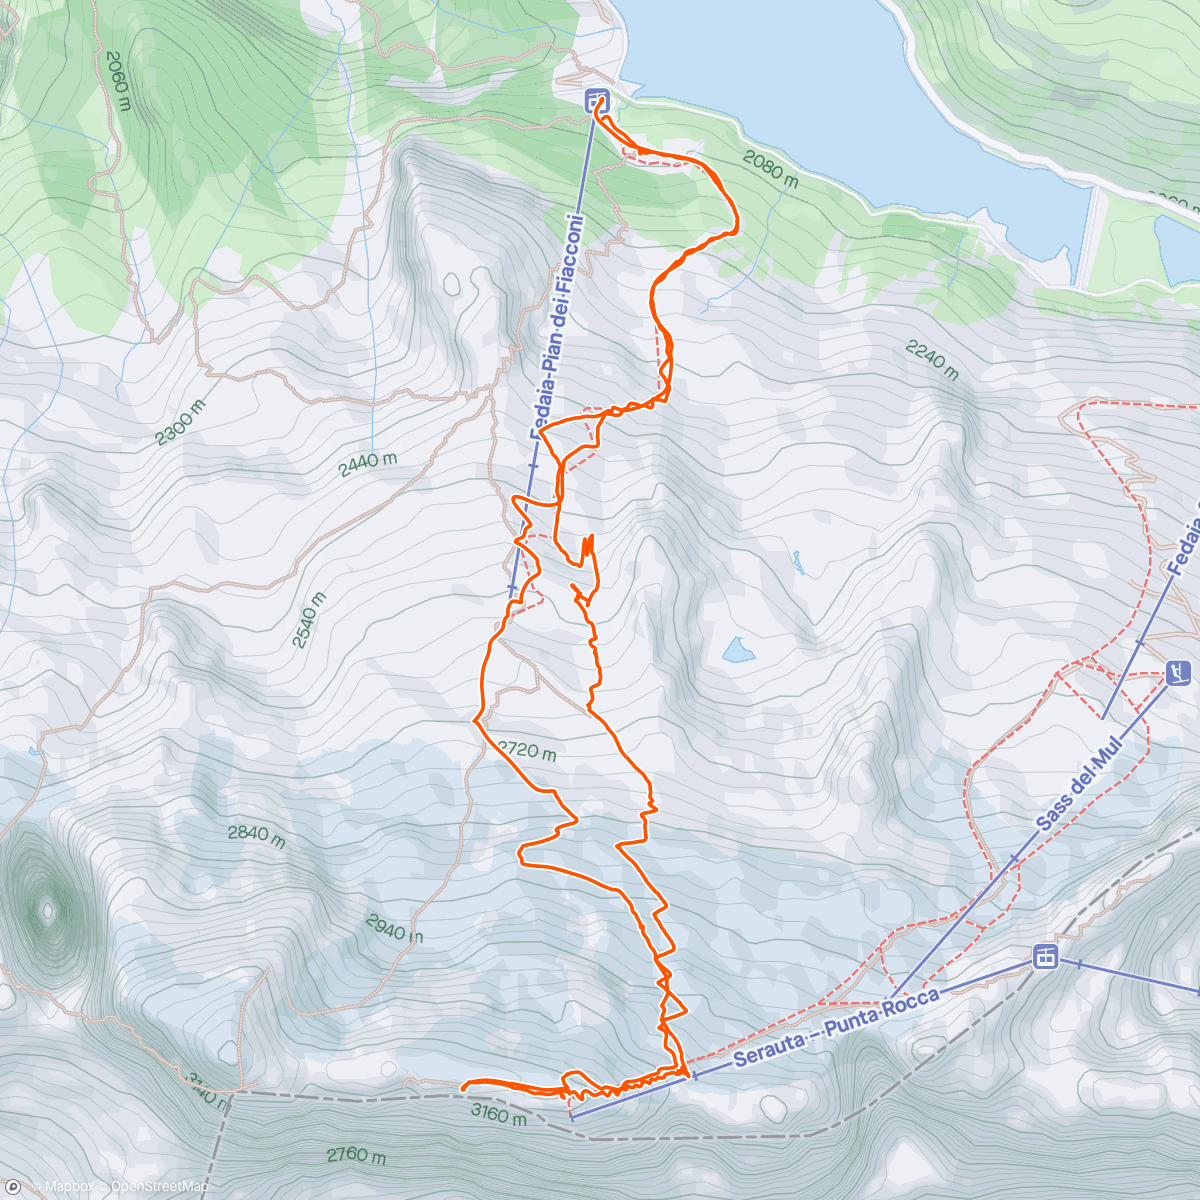 Map of the activity, Skialp in Marmolada